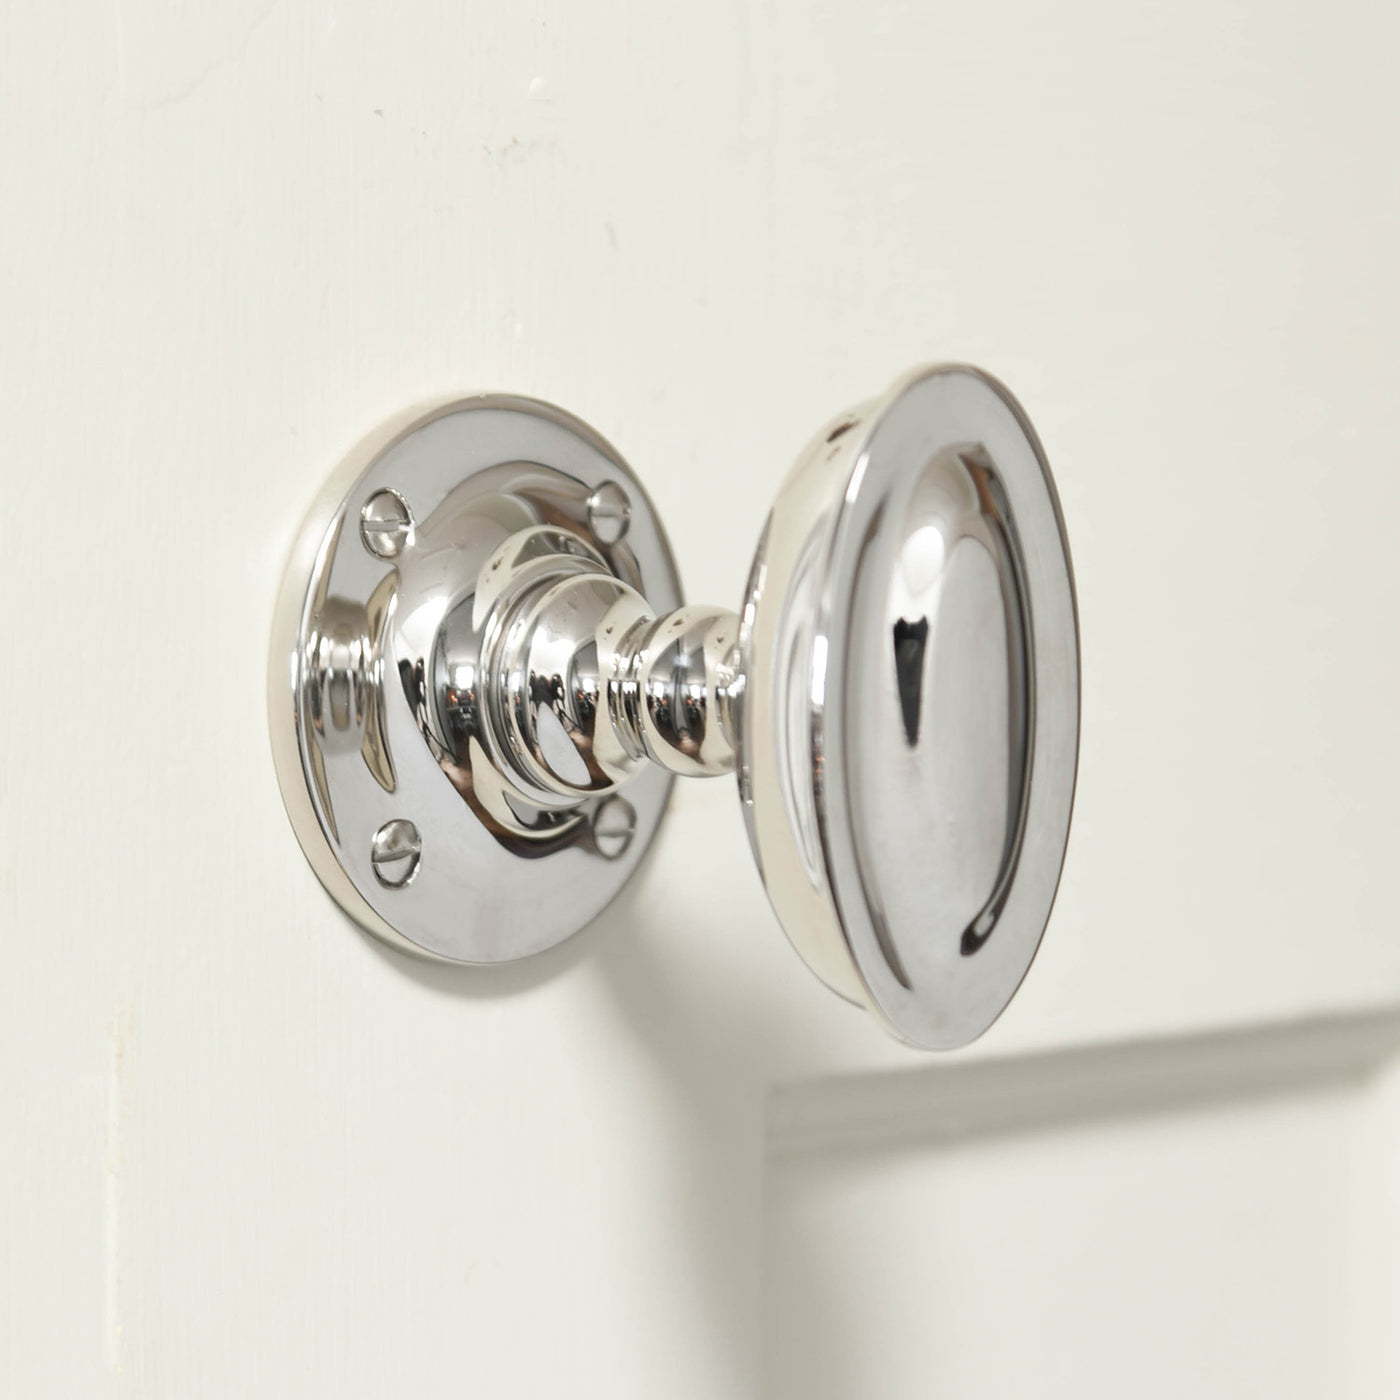 Oval shaped door knob with ridged detail